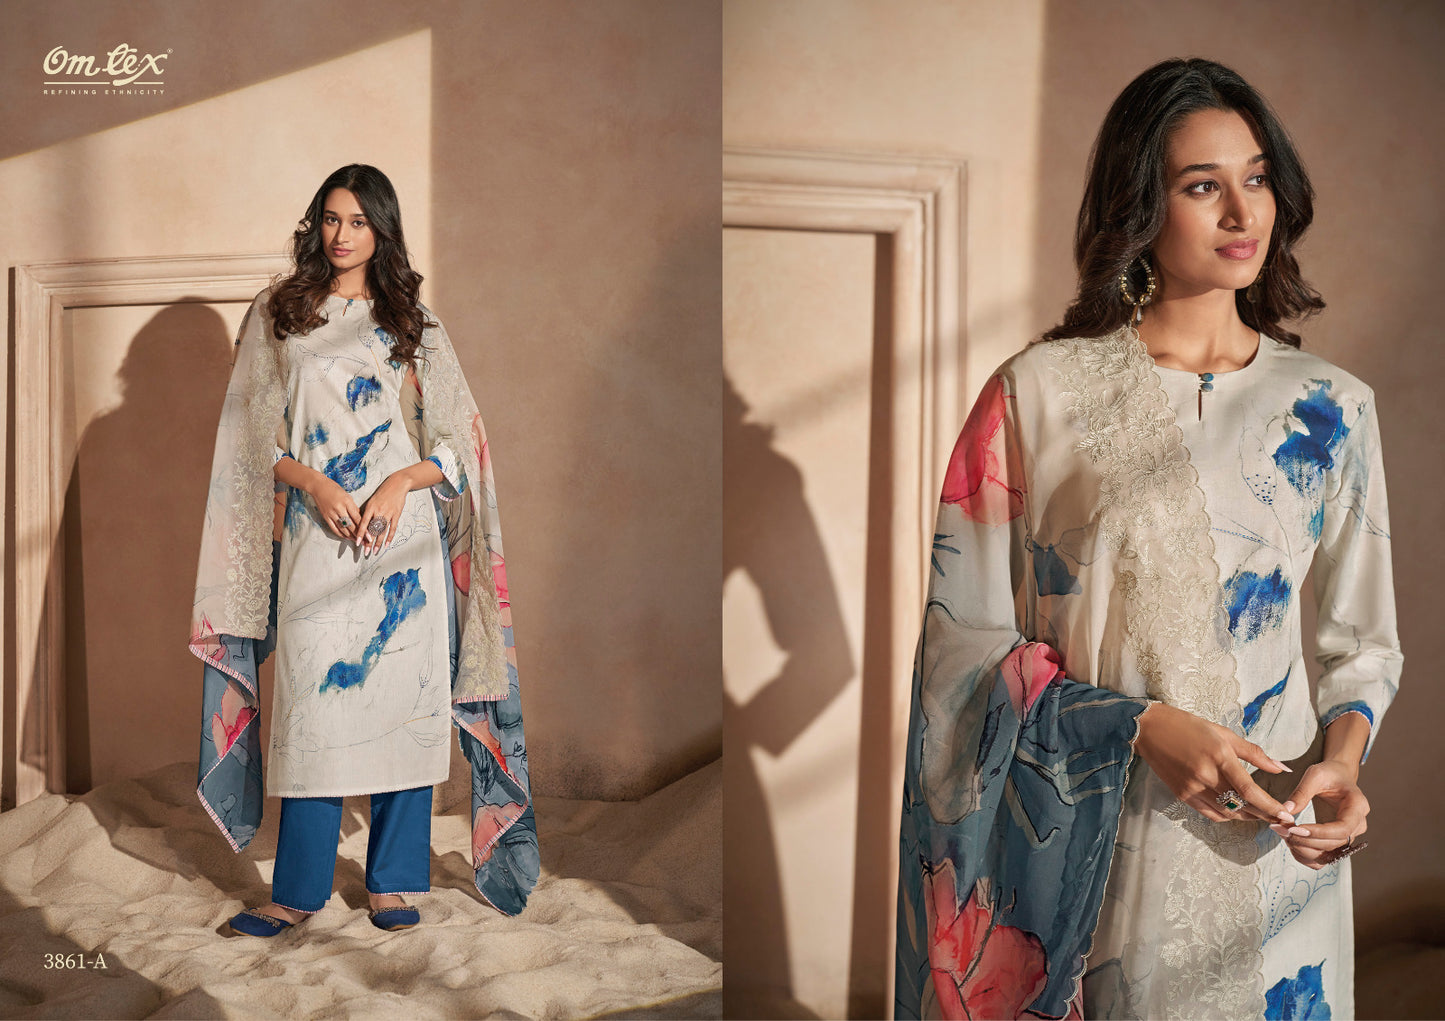 Praniti Omtex Lawn Cotton Pant Style Suits